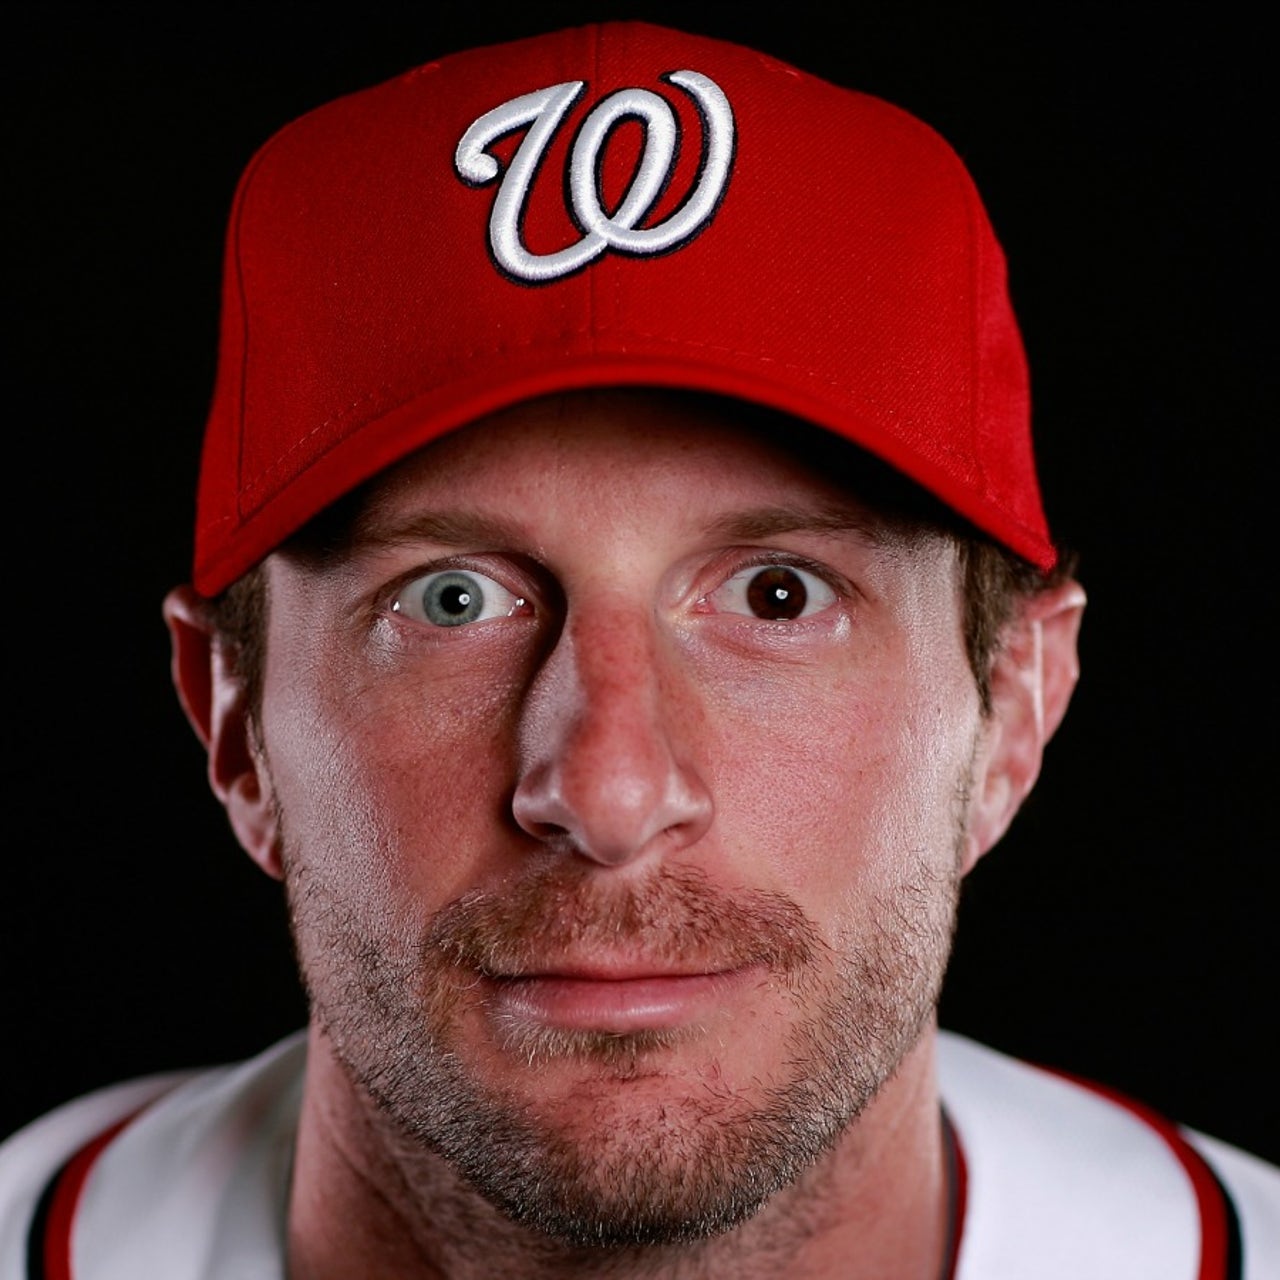 Max Scherzer's new dog has two different colored eyes just like